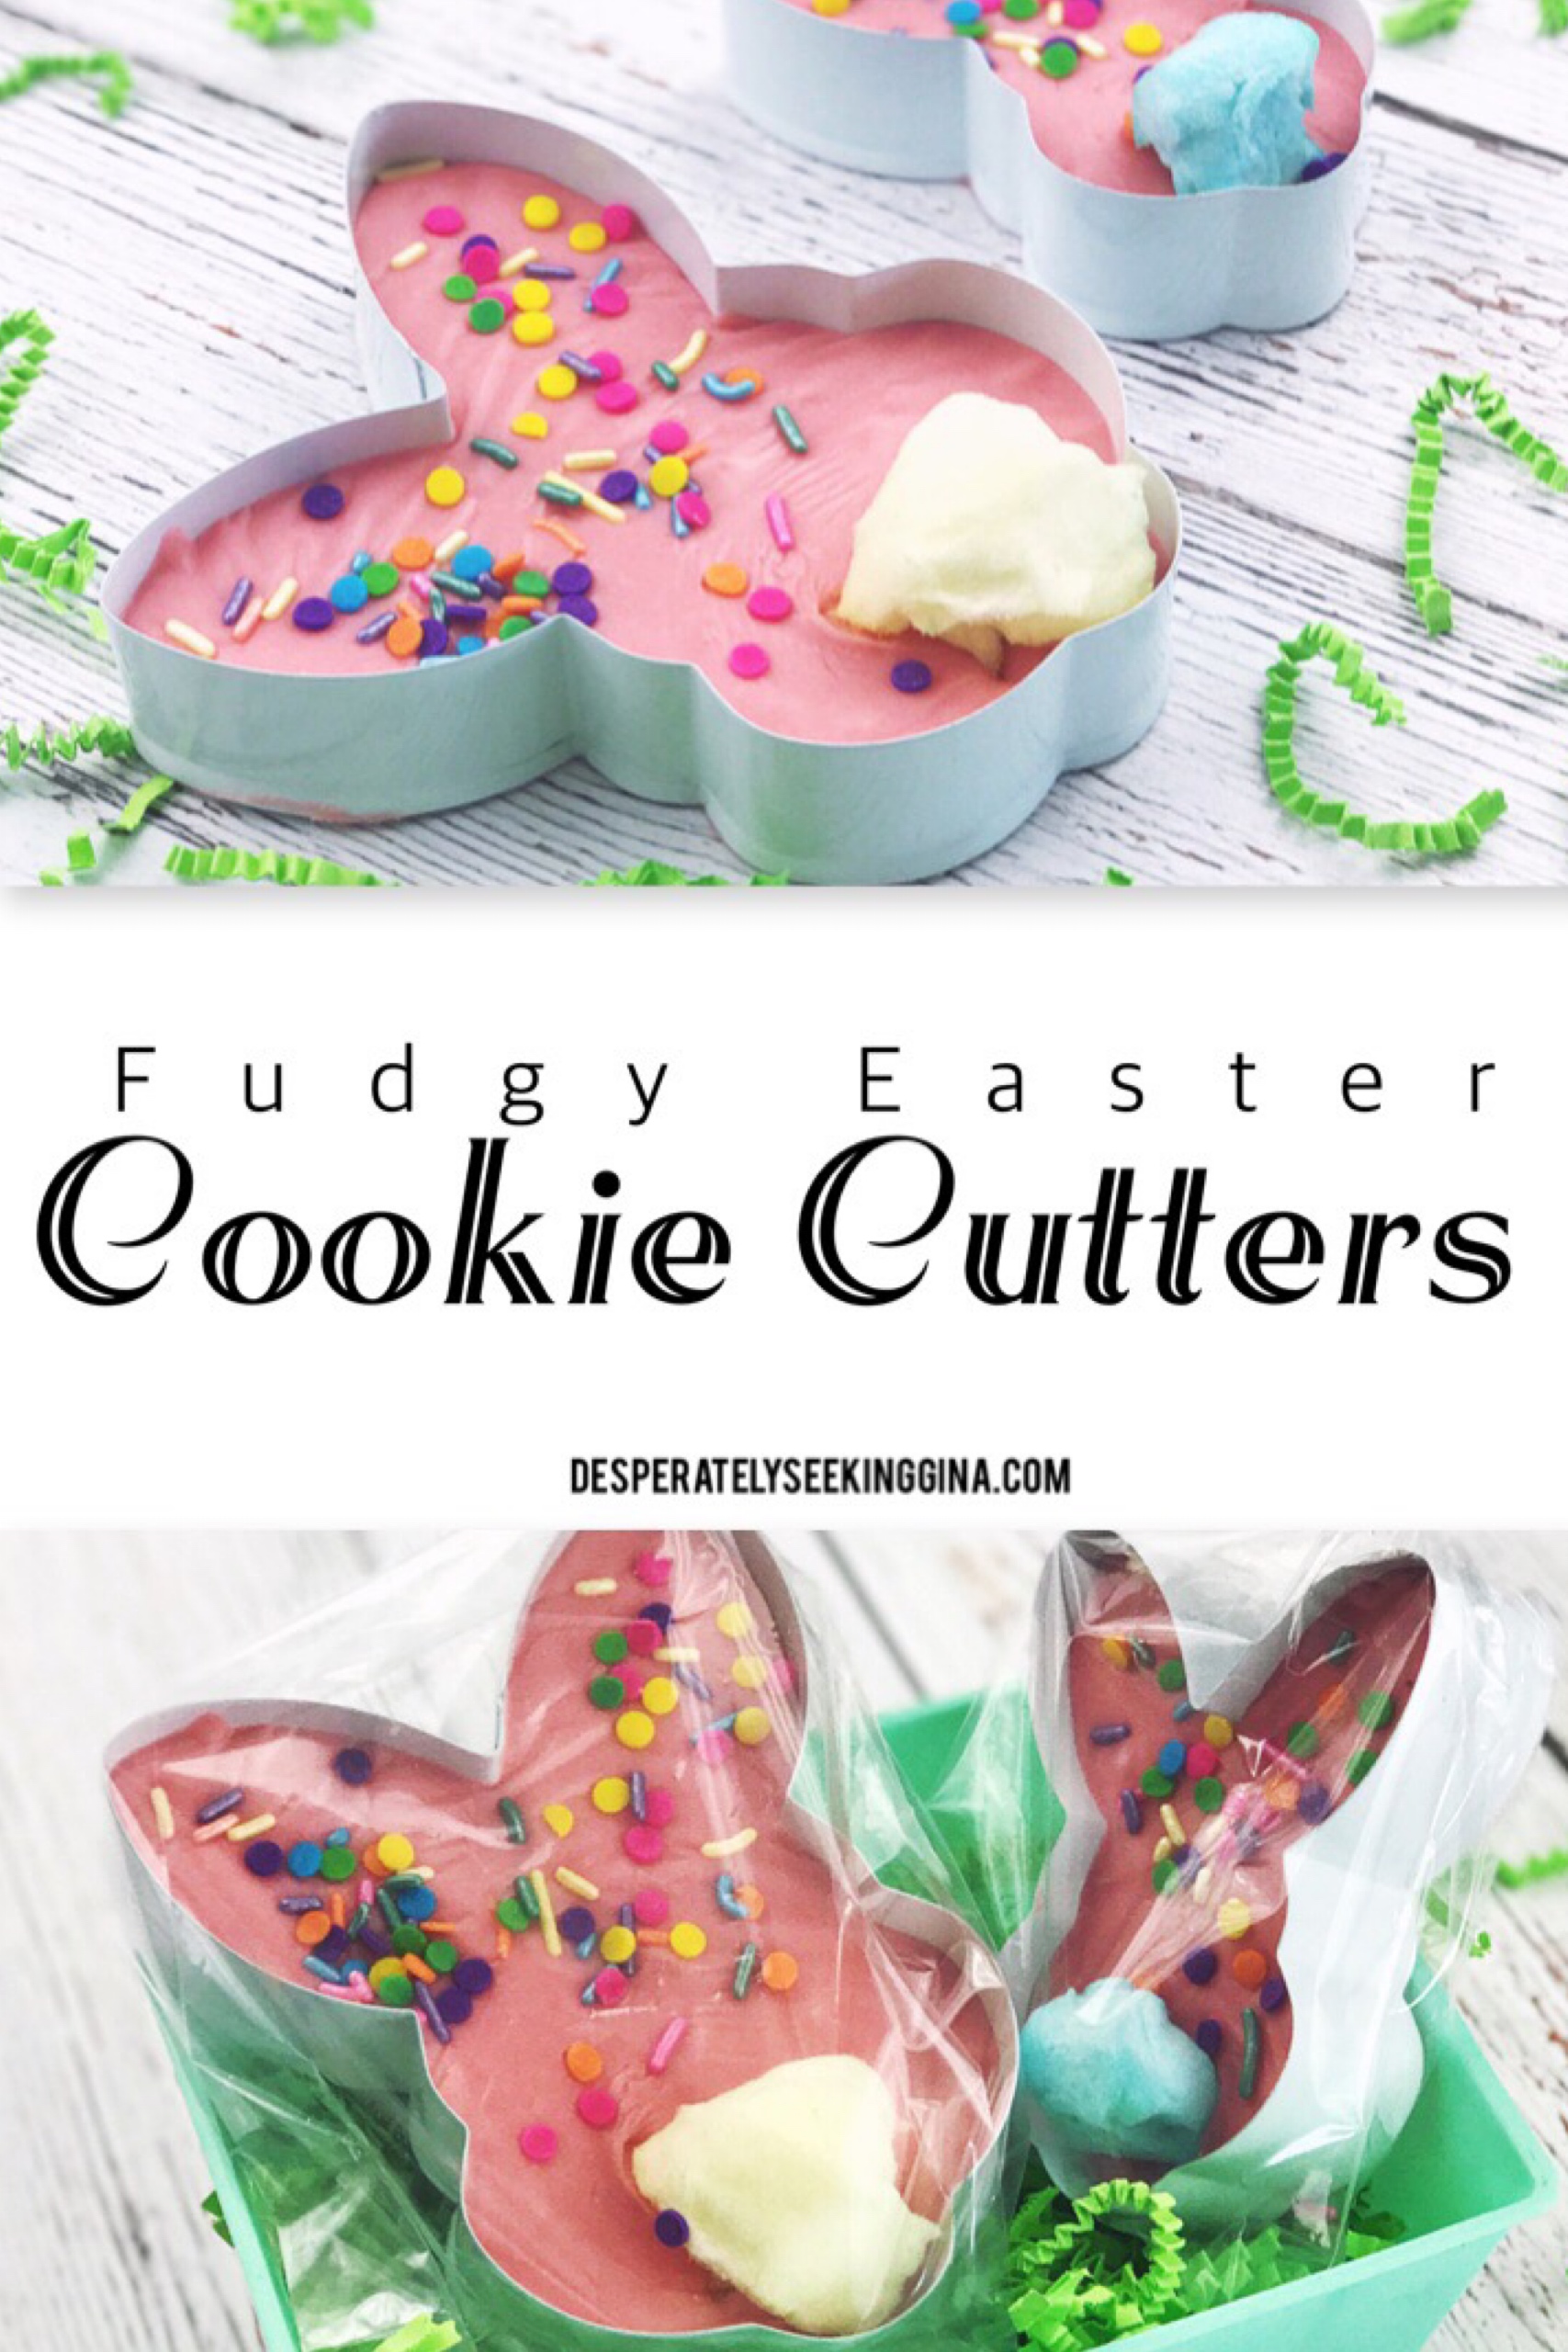 Fudgy Easter Cookie Cutter Gifts - Desperately Seeking Gina